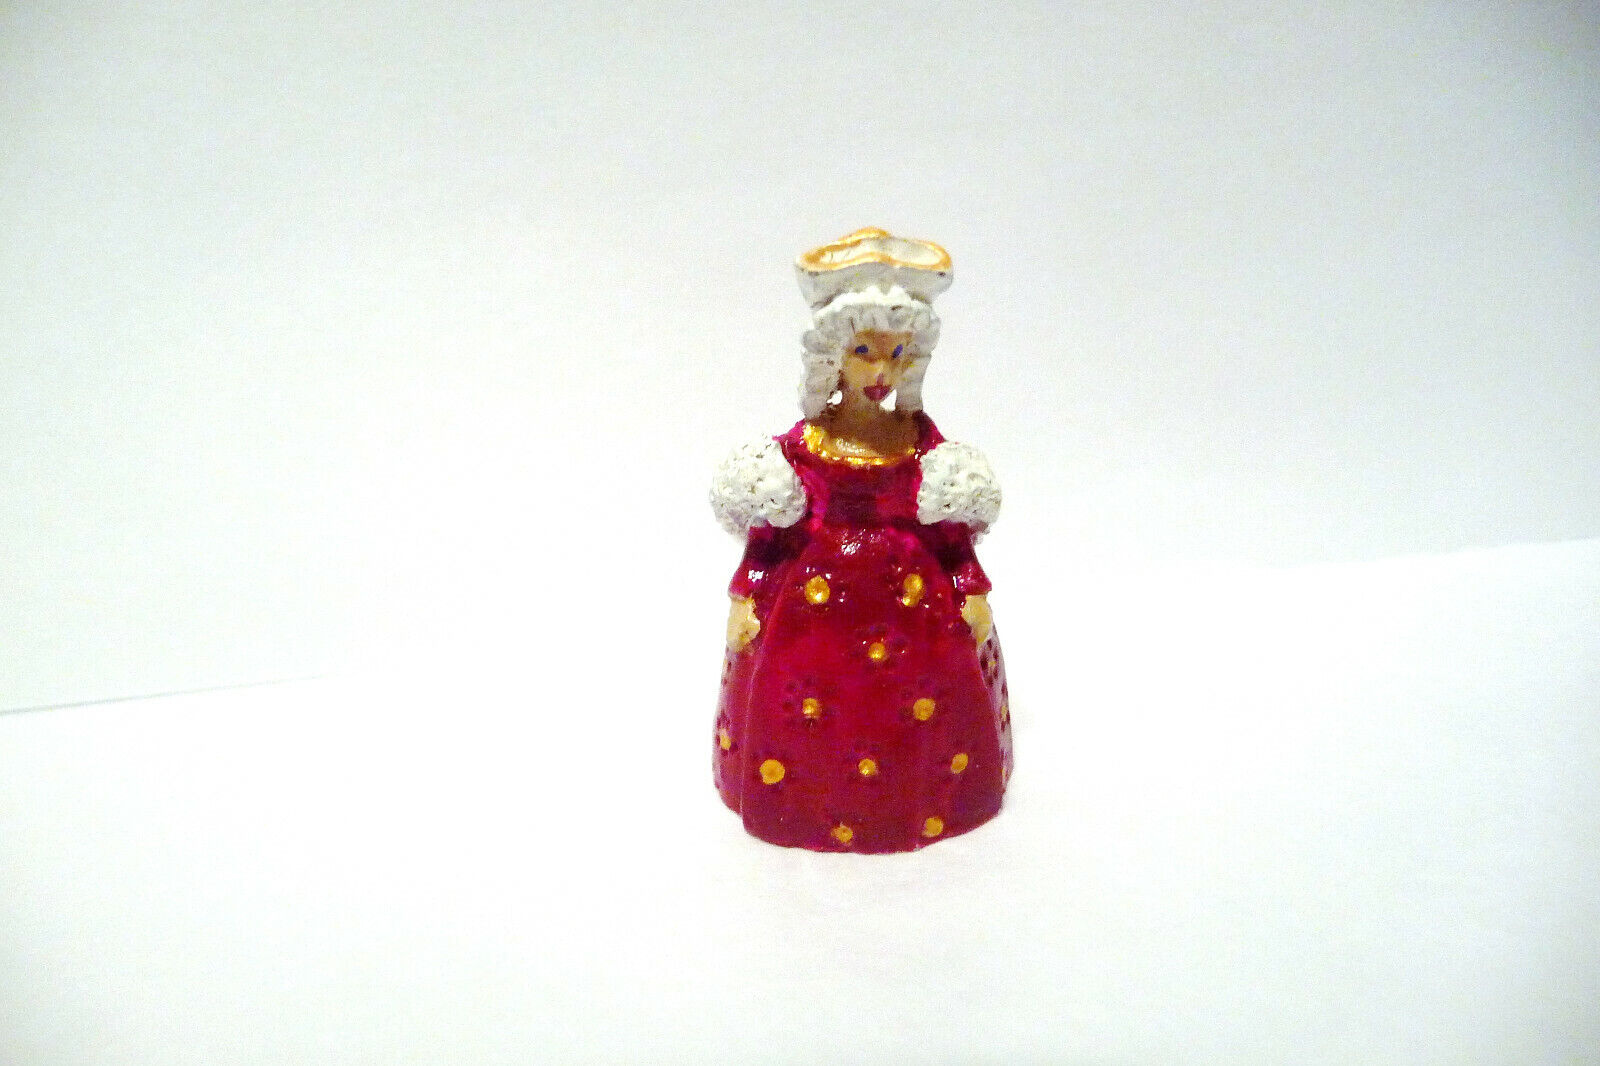 Thimble Guild 3/09 H/p Woodsetton King Viii 500th Aniversary "anne Of Cleves"